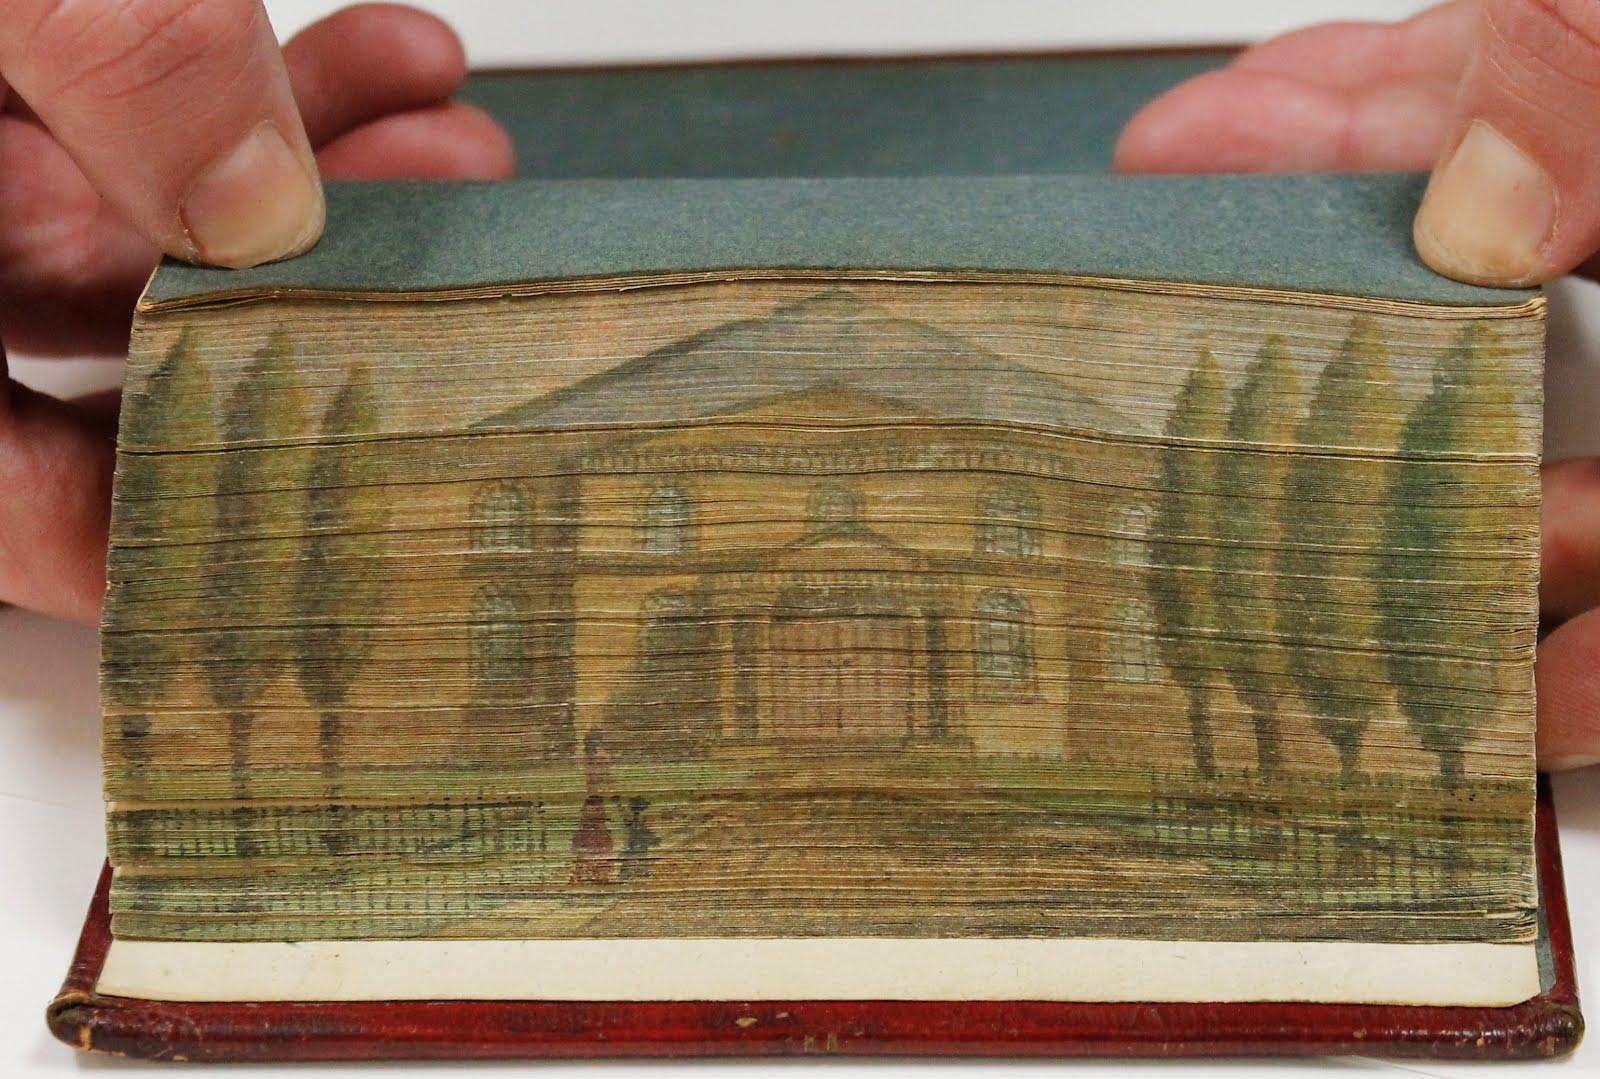 Fore-edge painting featuring an image of the front of a large estate with two figures facing its door